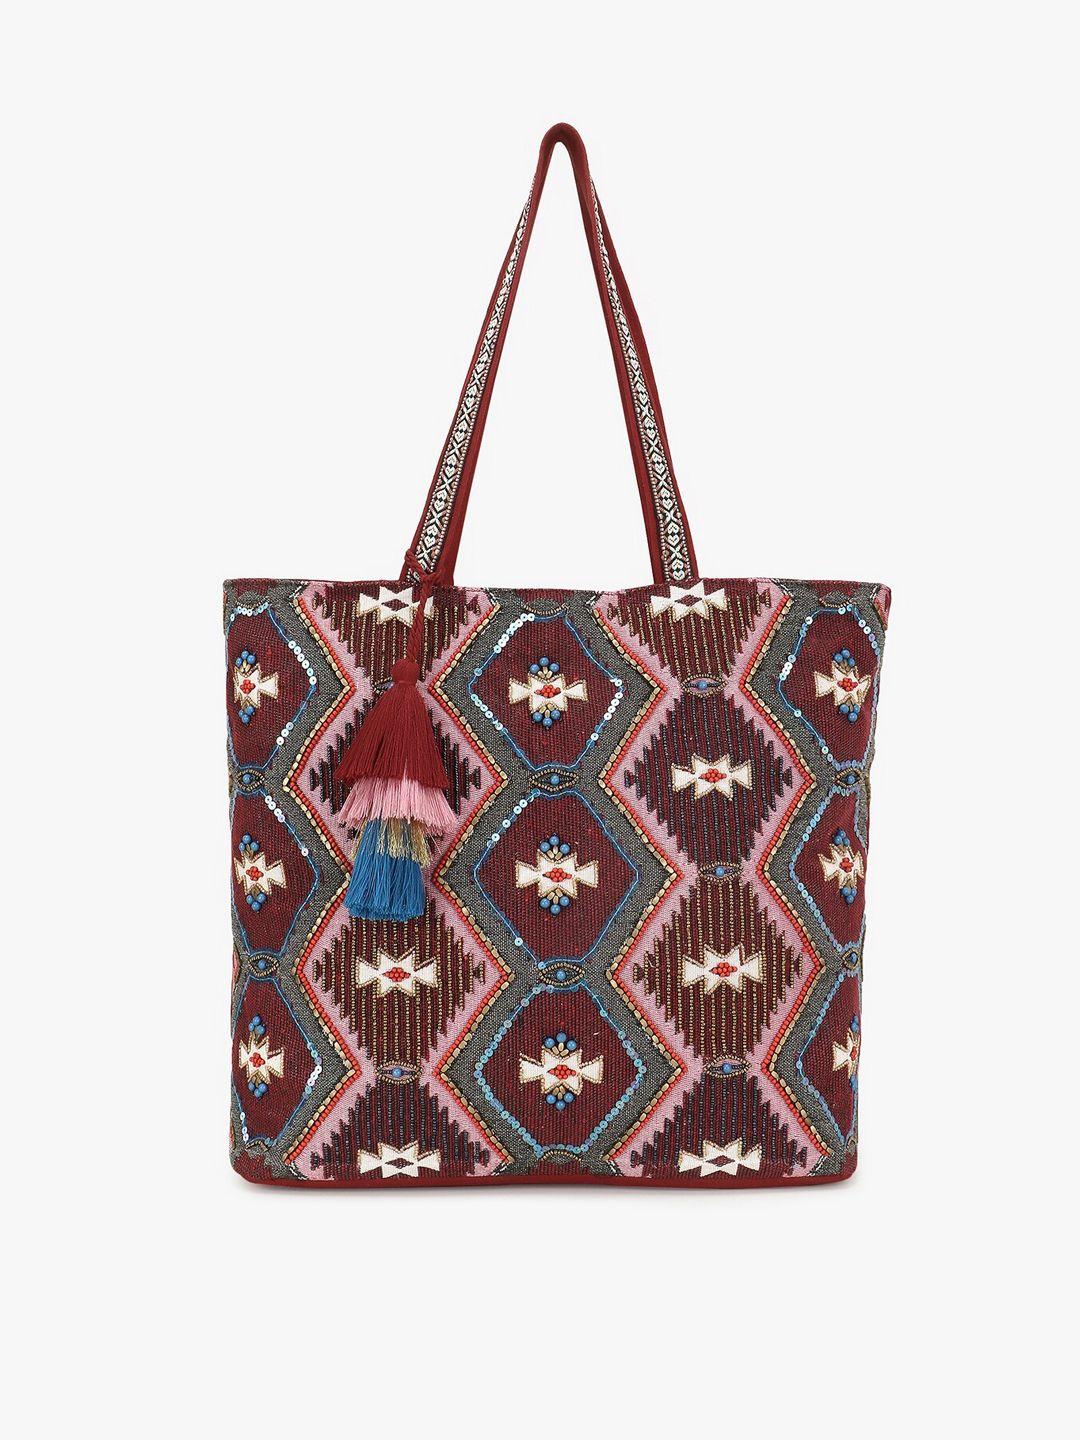 anekaant maroon embellished shopper tote bag with tasselled